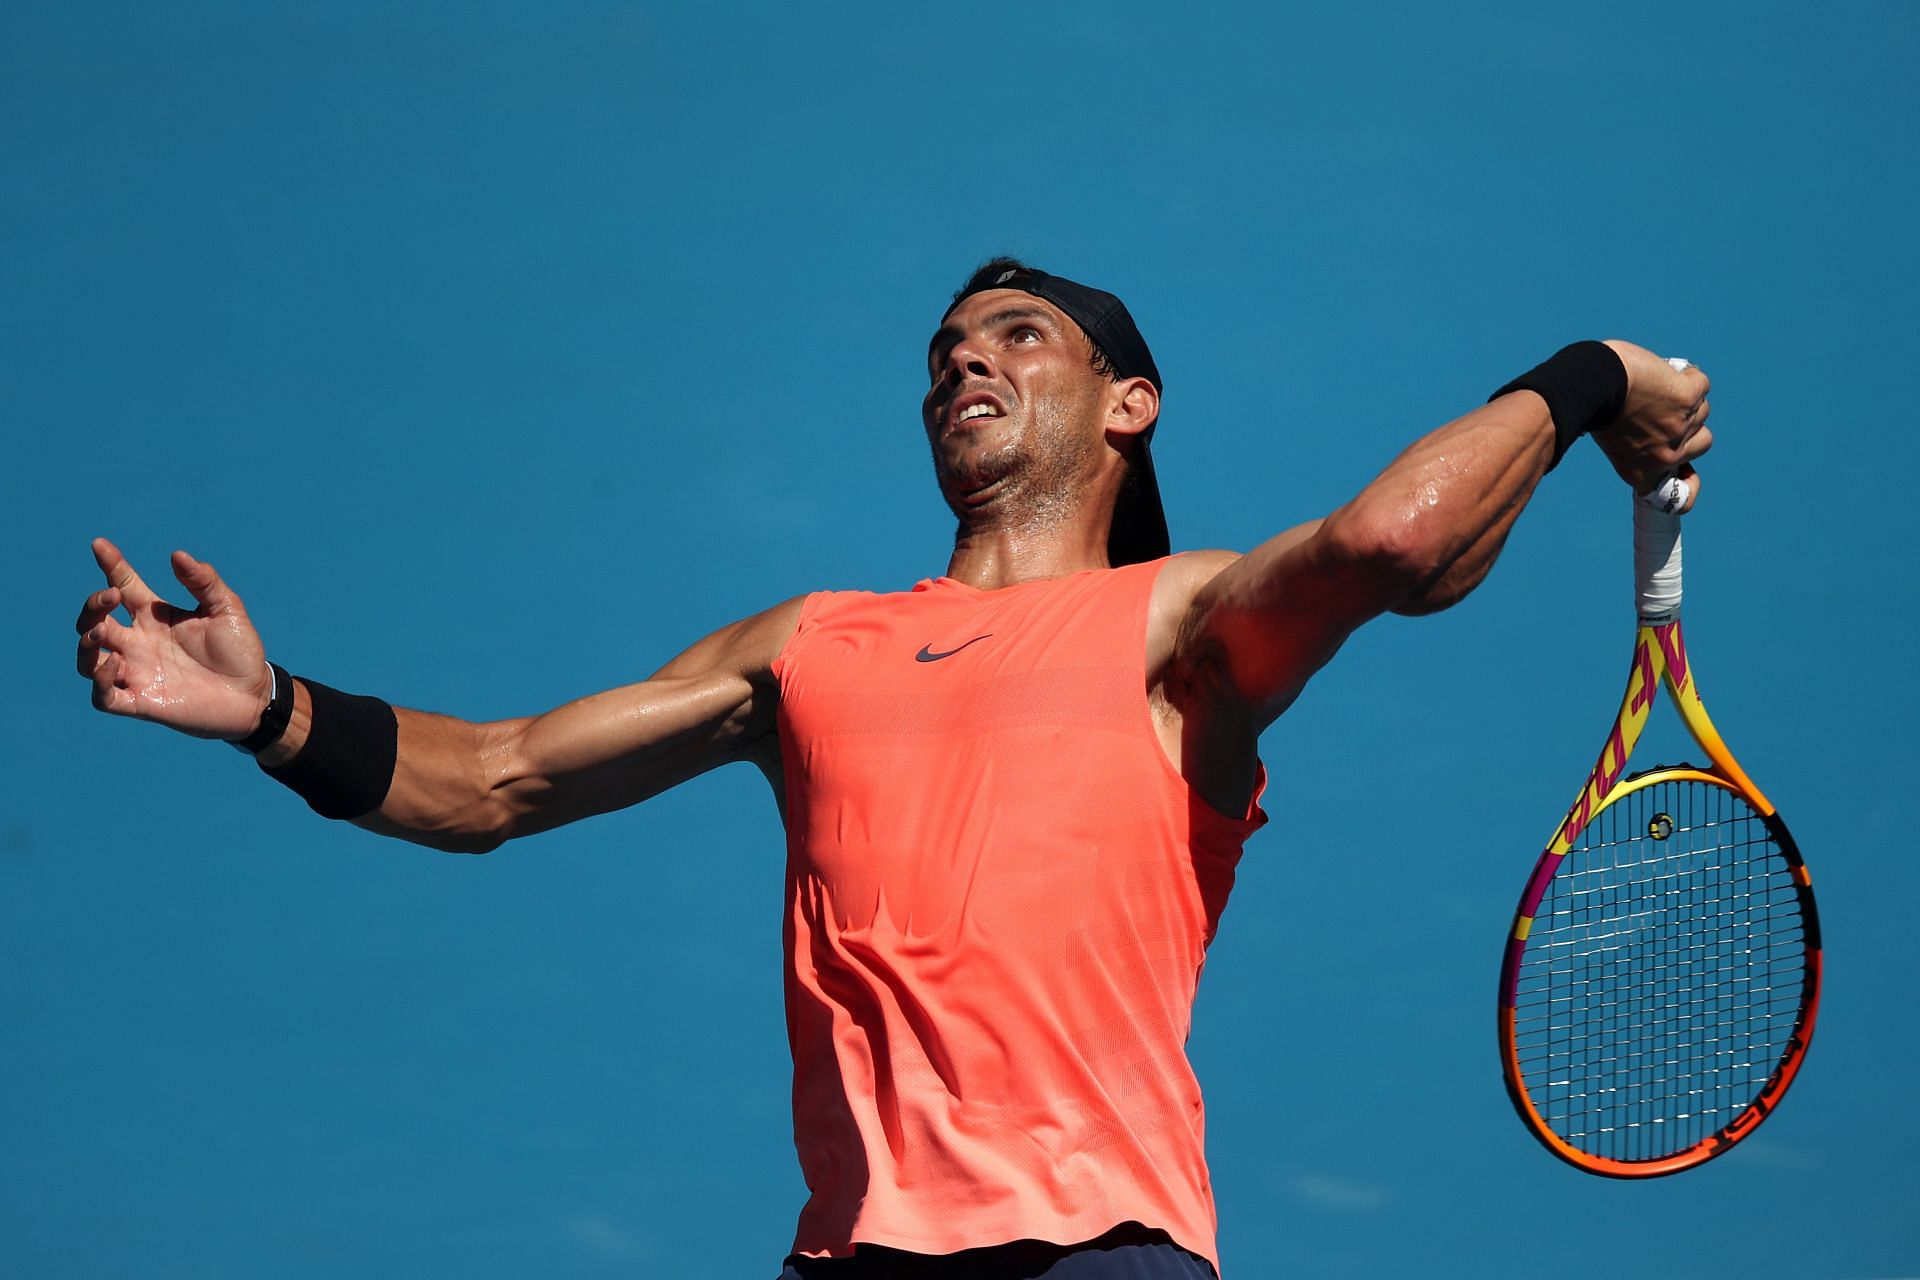 Rafael Nadal during a practice session ahead of the Australian Open 2022